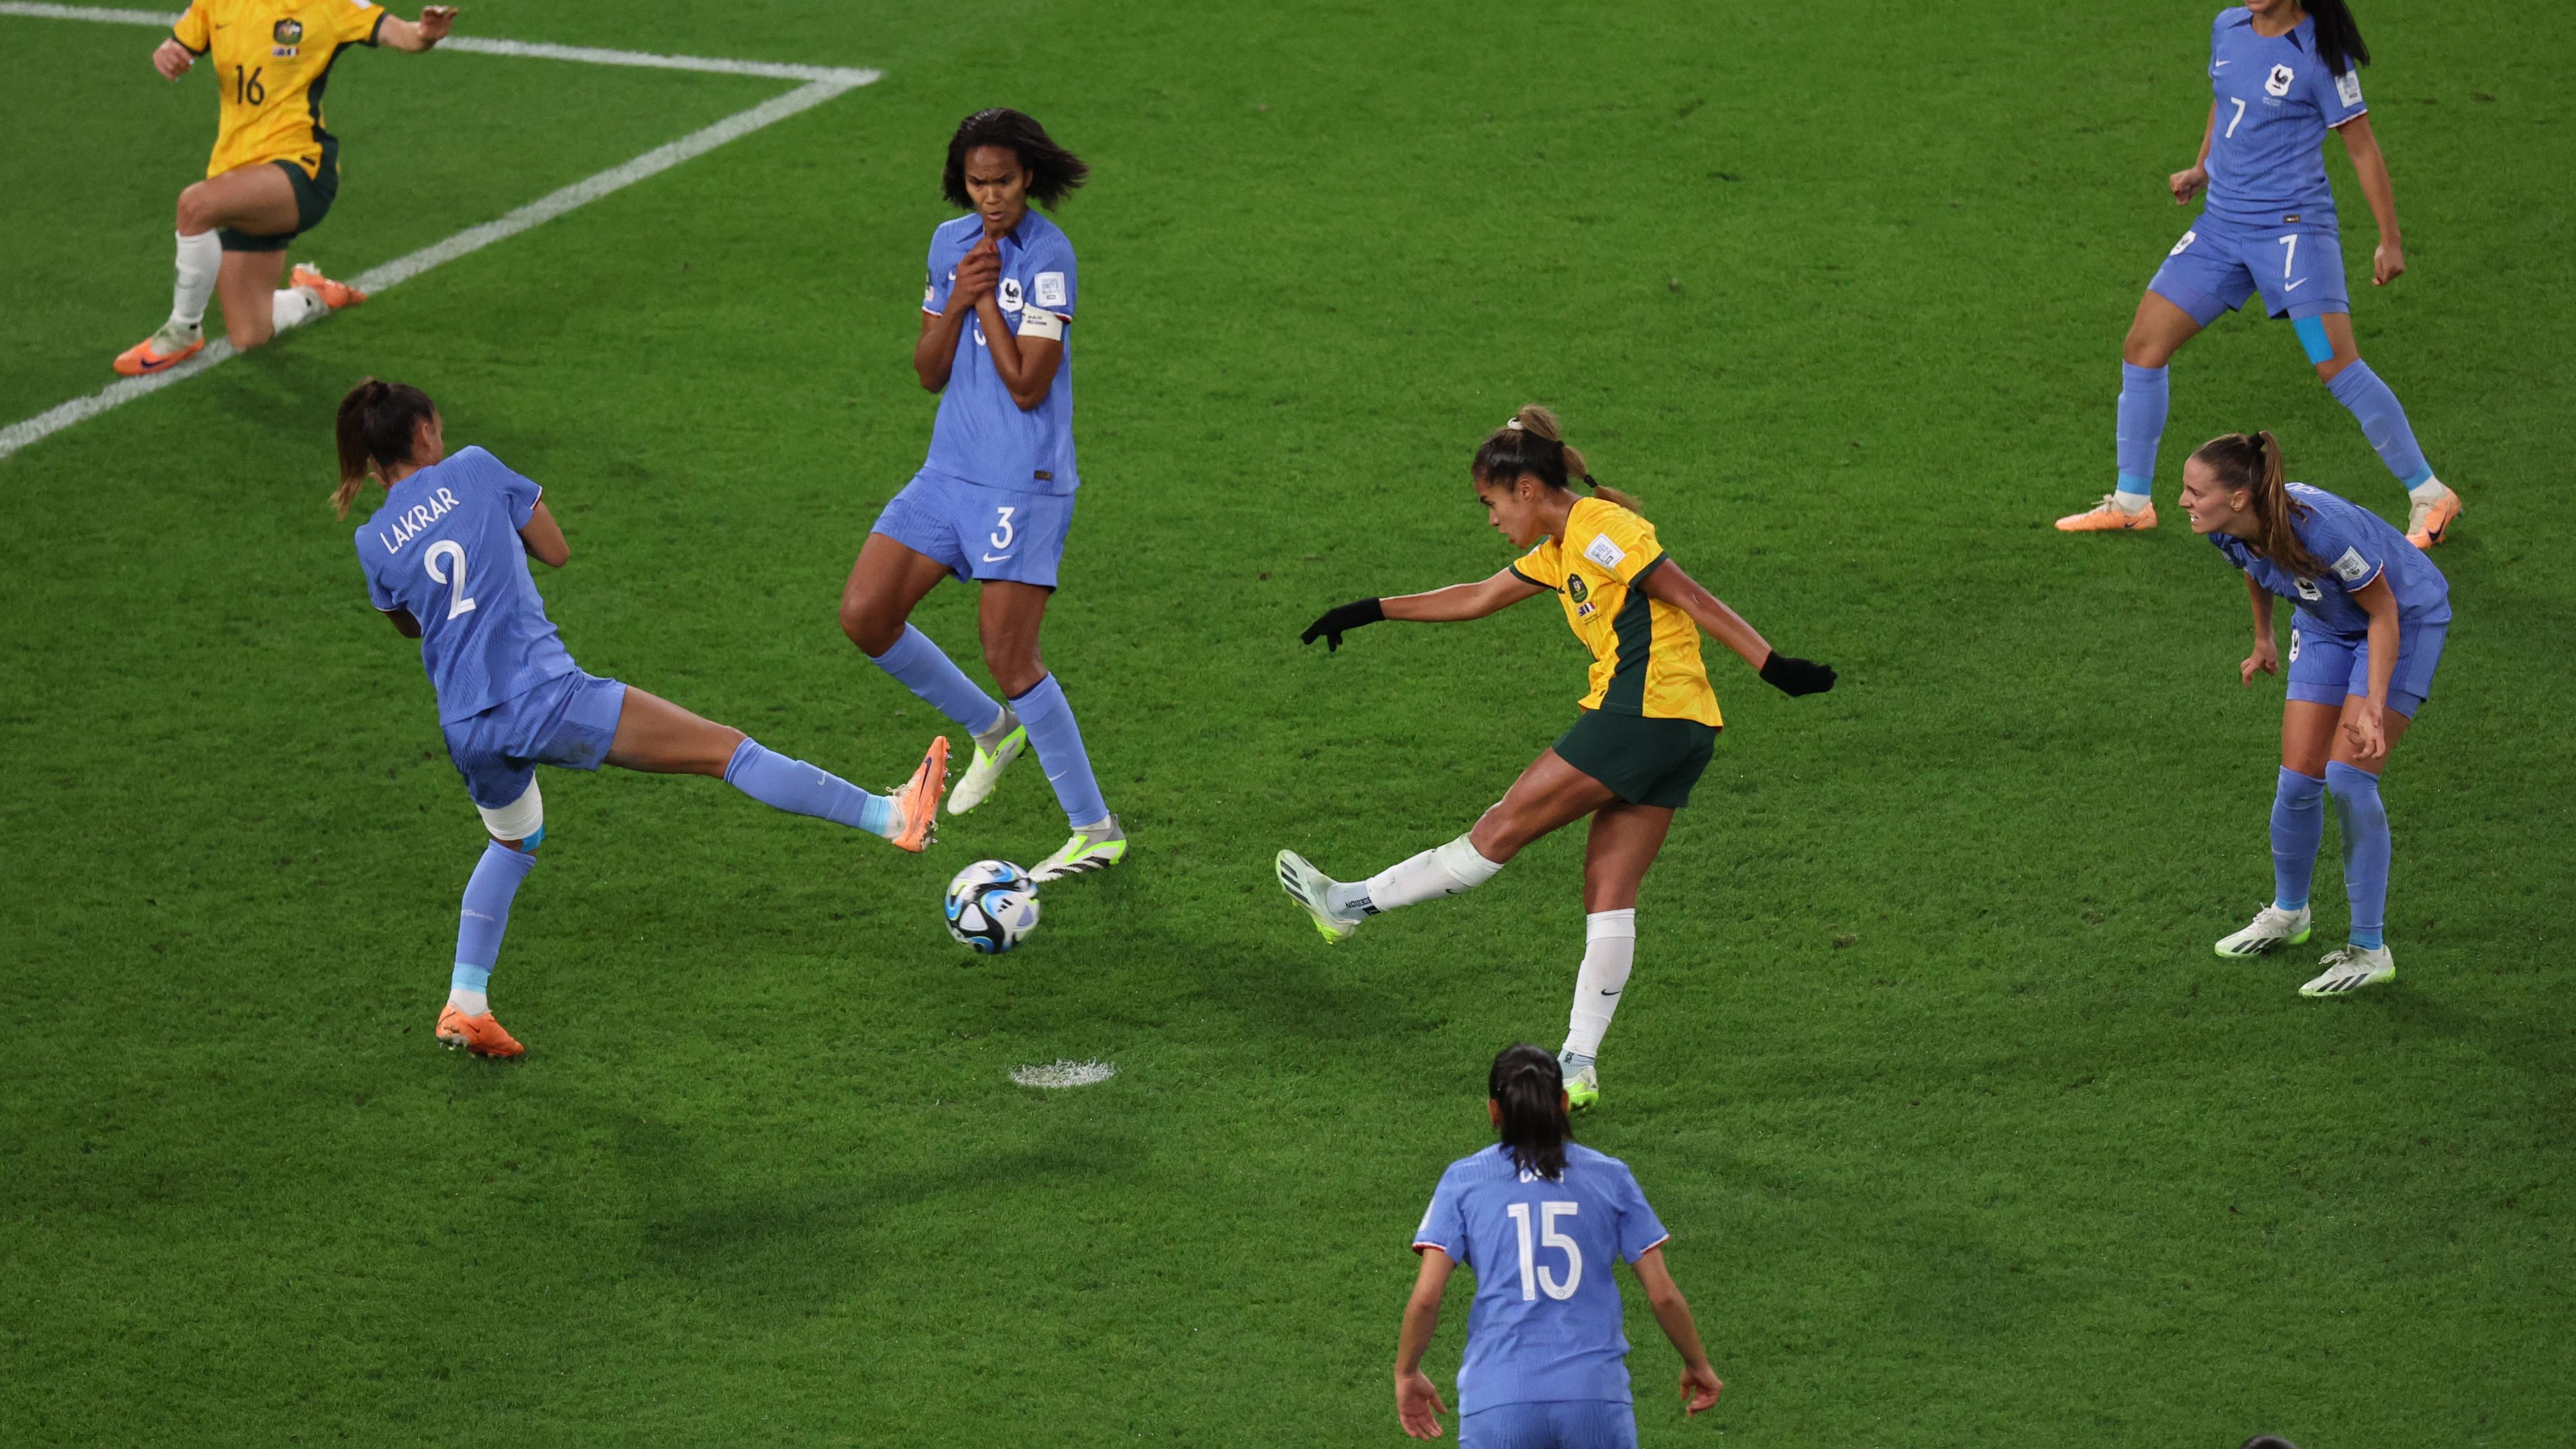 Player ratings: No luck for young Matildas star Mary Fowler who was 'best player on the pitch'